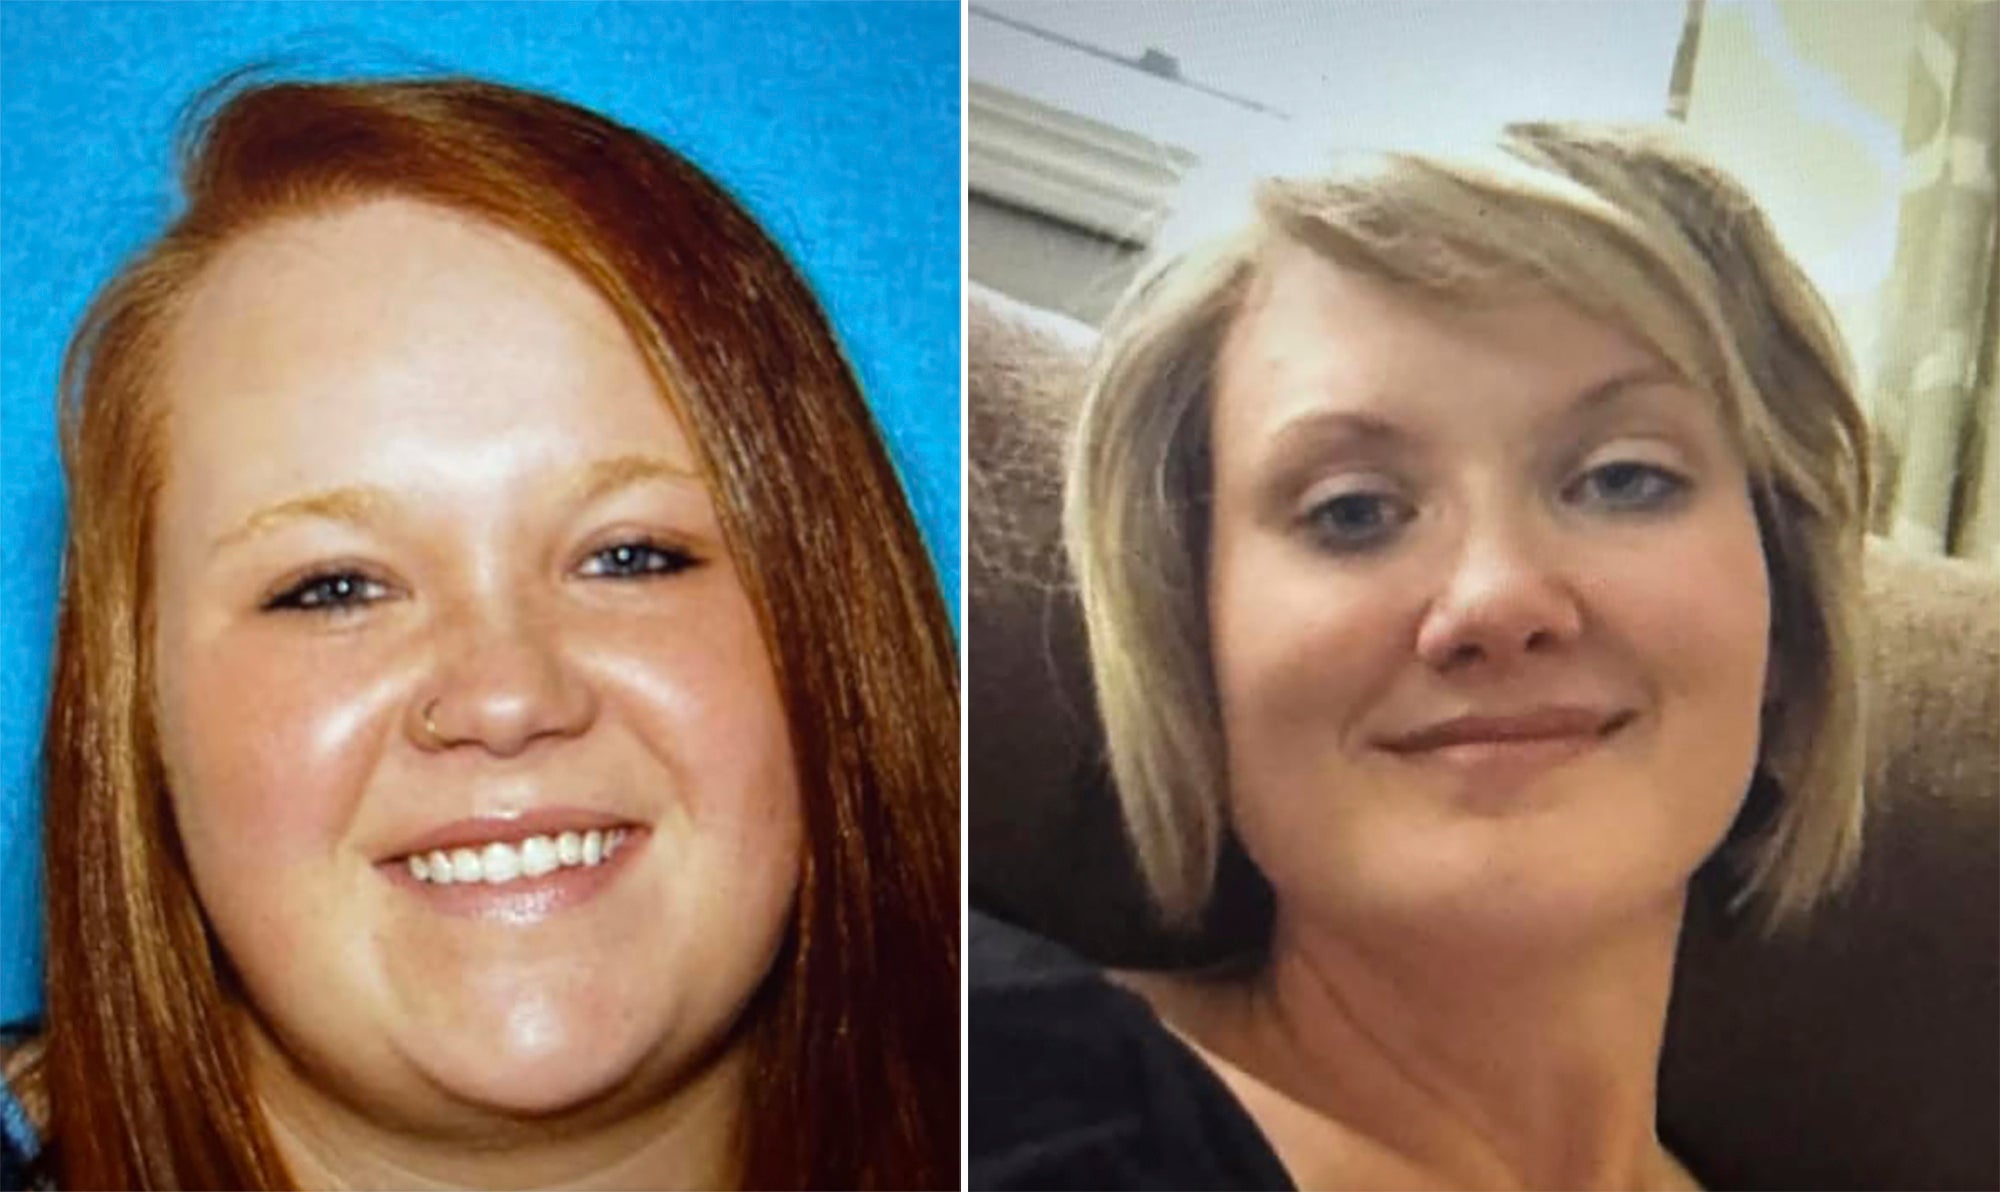 Veronica Butler, left, and Jilian Kelley disappeared on 30 March in rural Oklahoma. Their bodies were identified last week and five people have been charged over their murders